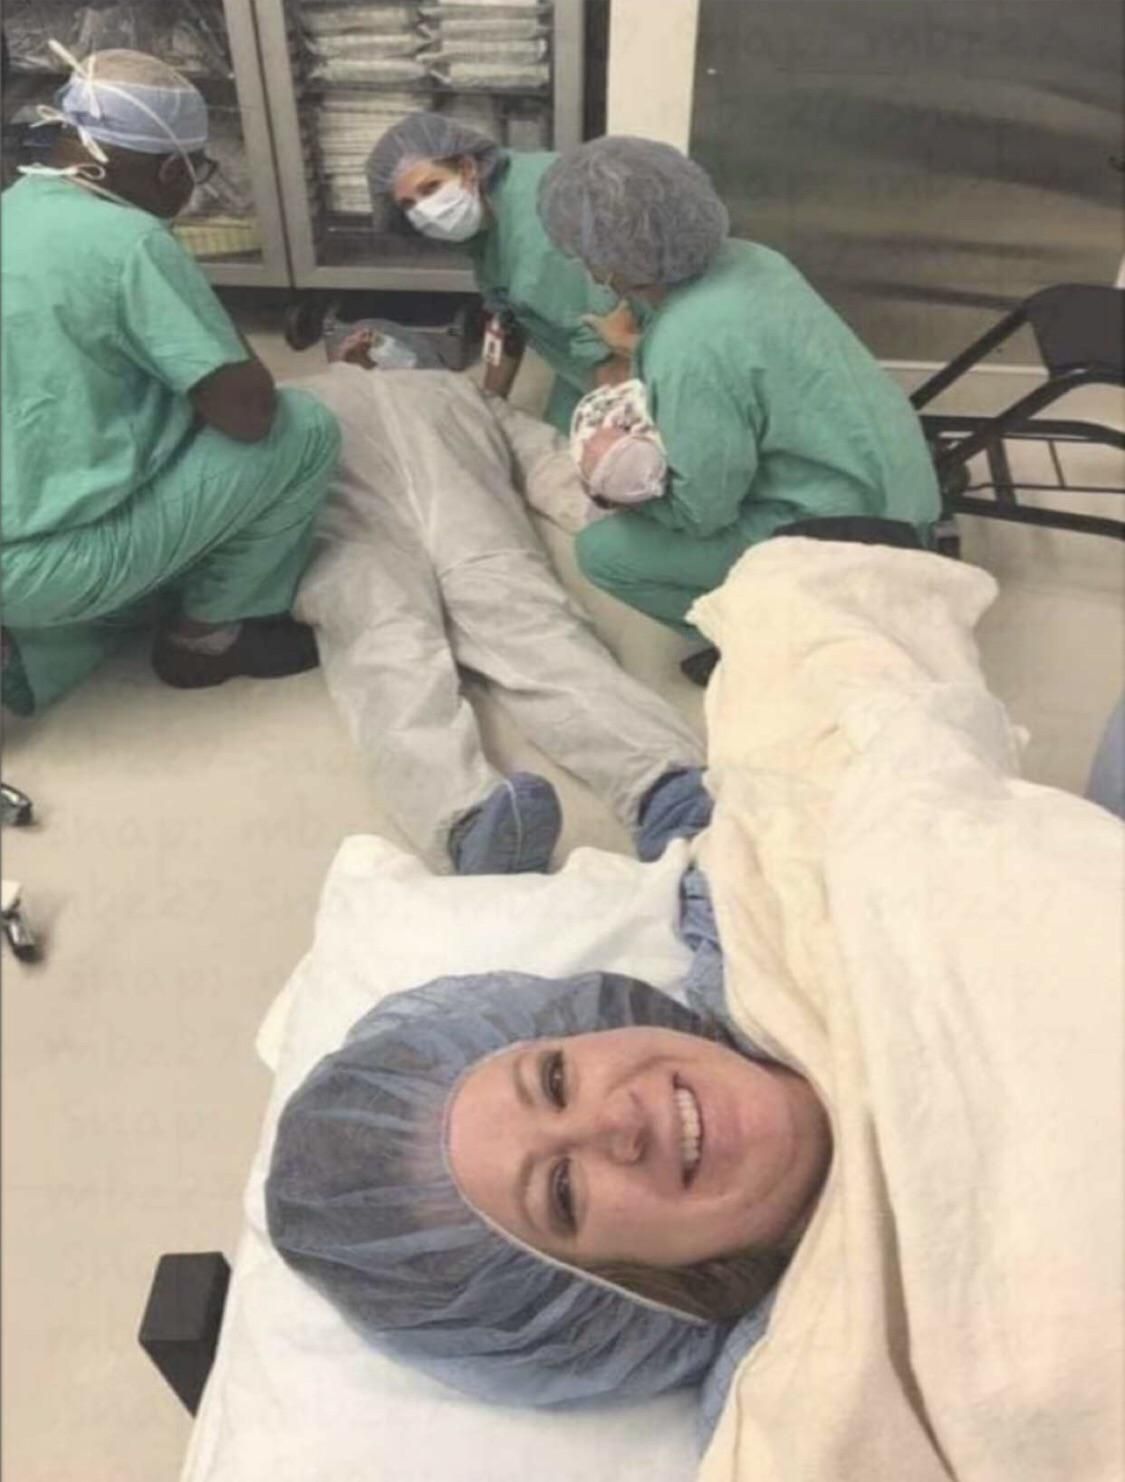 Her husband went to the pregnancy room with her to cheer her up.